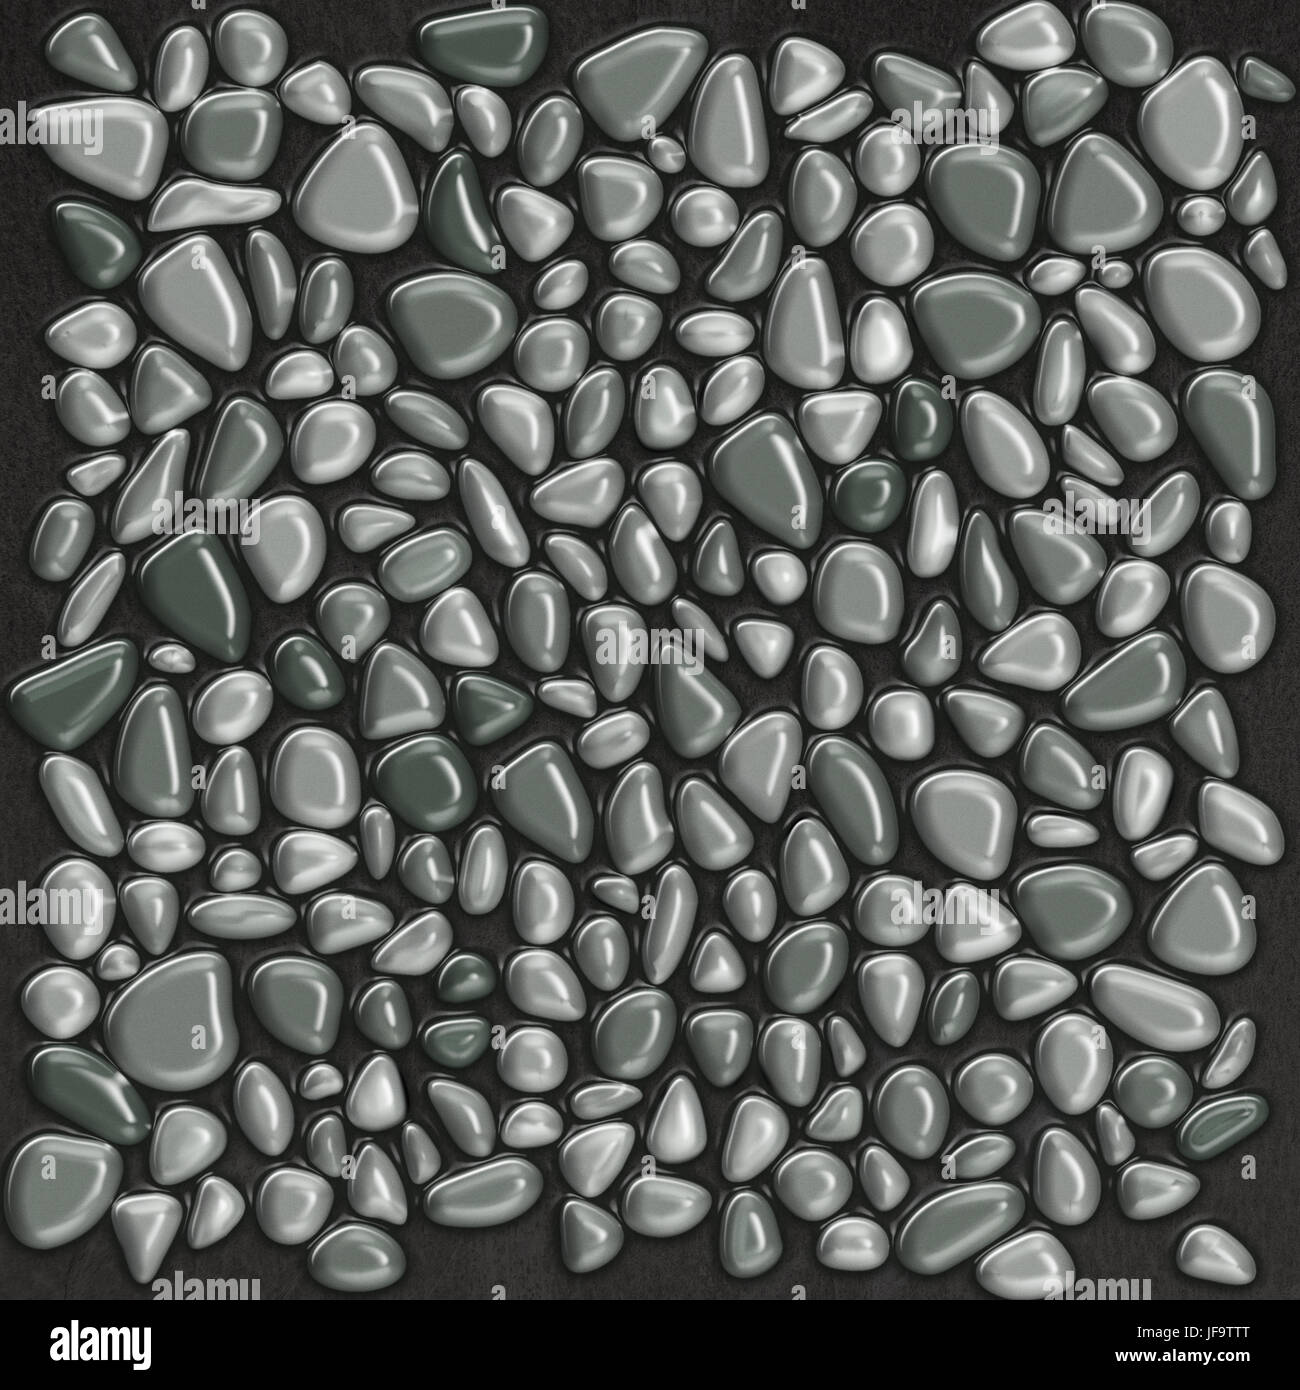 smith shinny grey stone wall floor art can be repeated as a pattern. Stock Photo